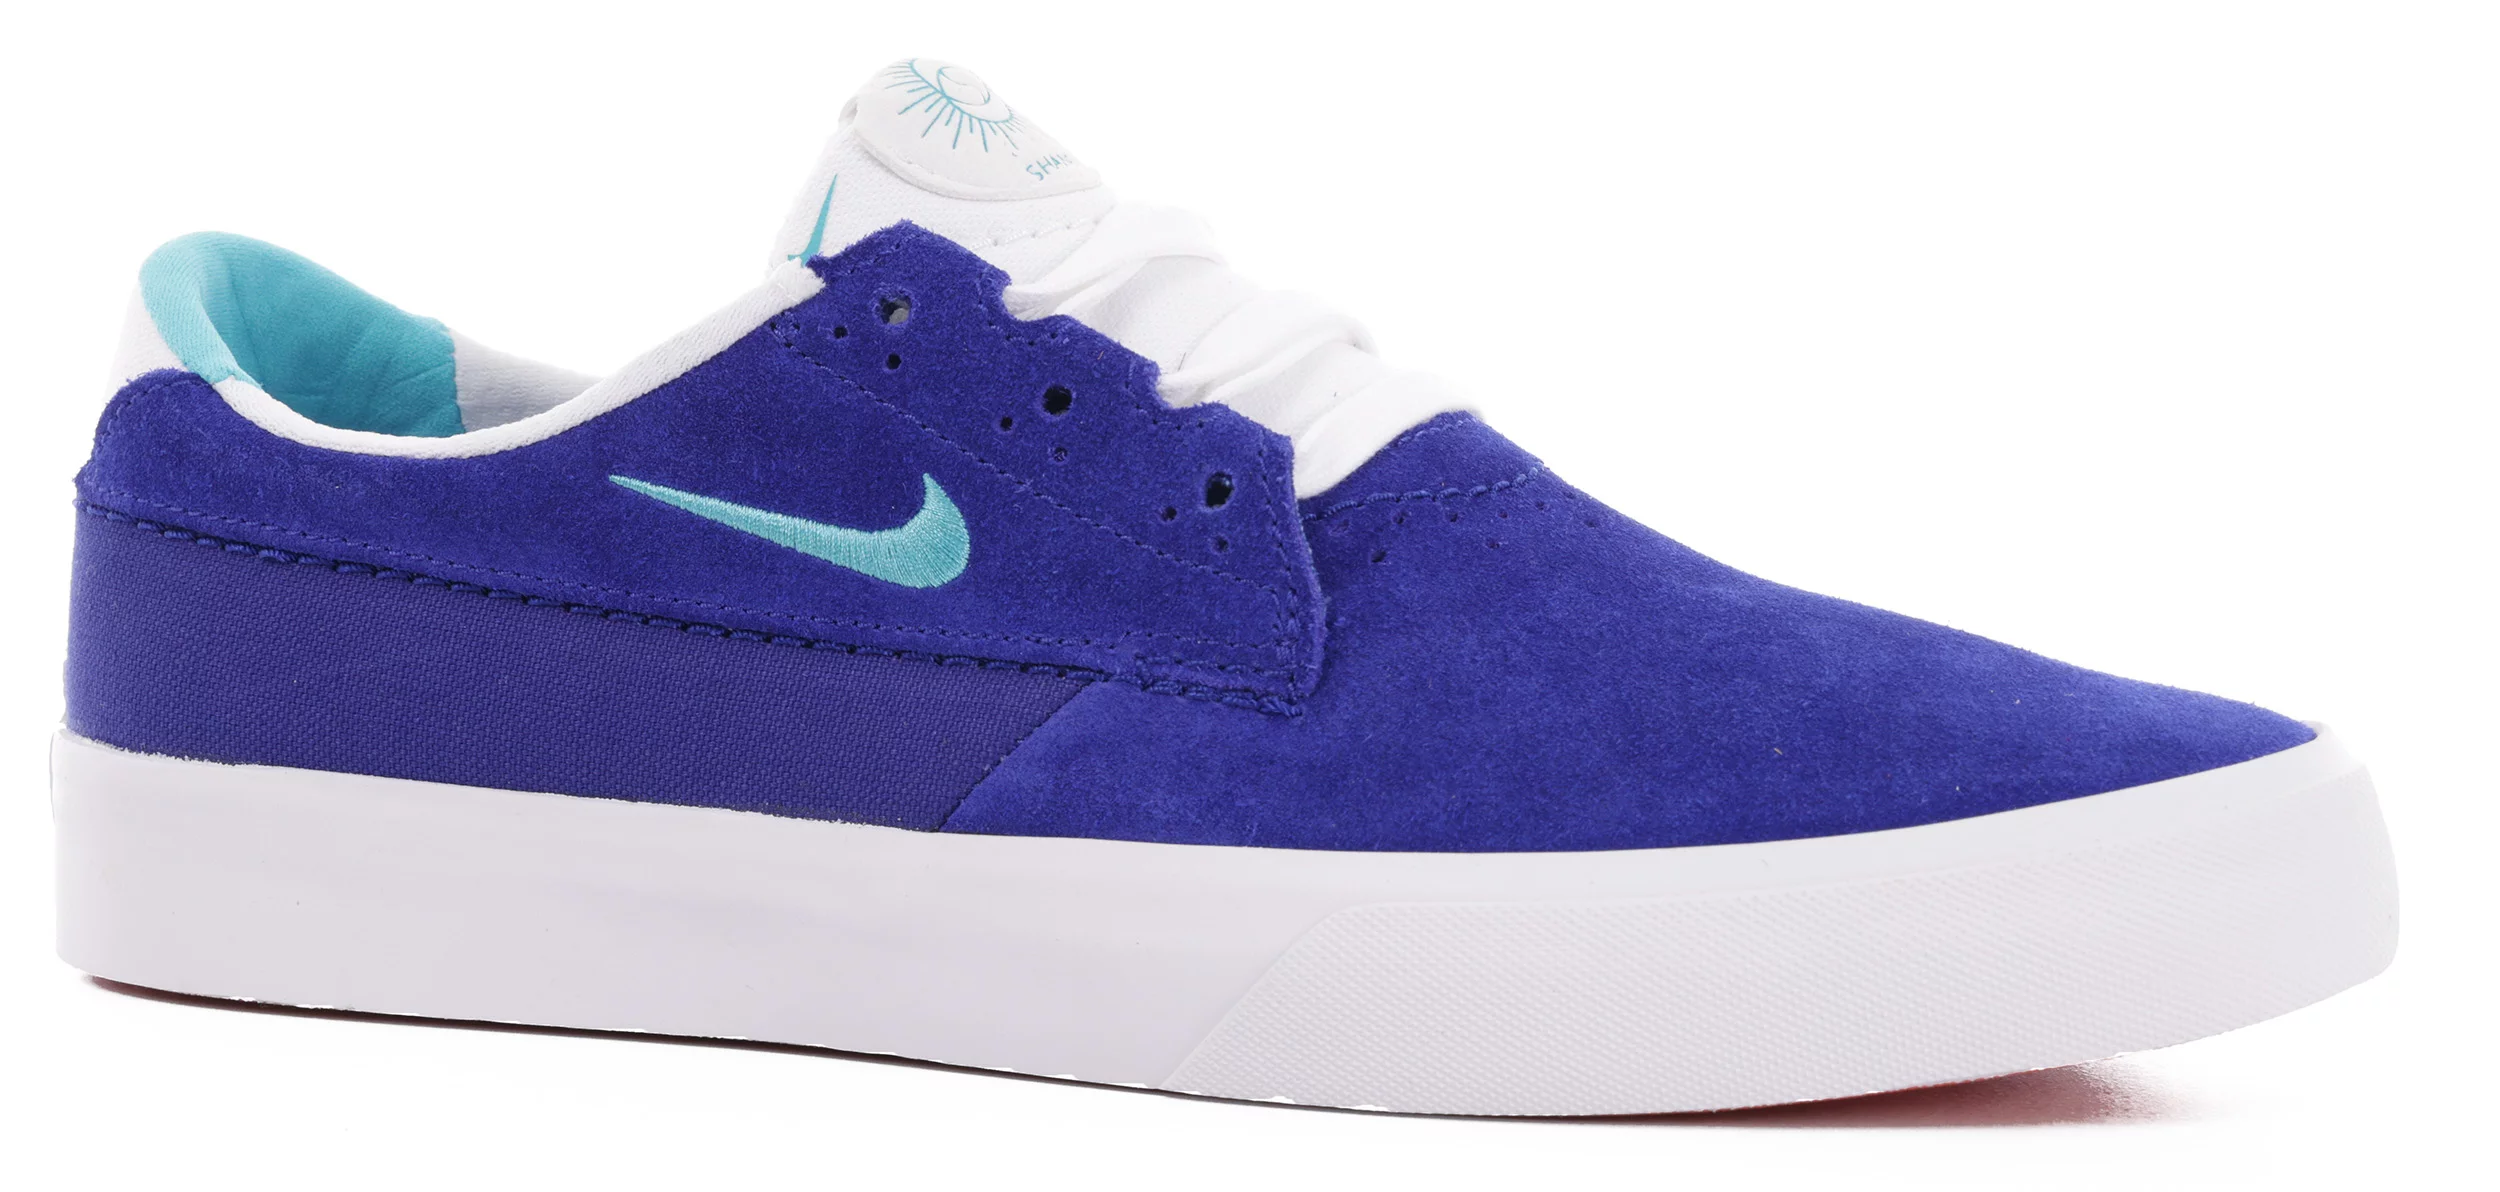 Nike SB Skate Shoes concord/turquoise blue-concord | Tactics